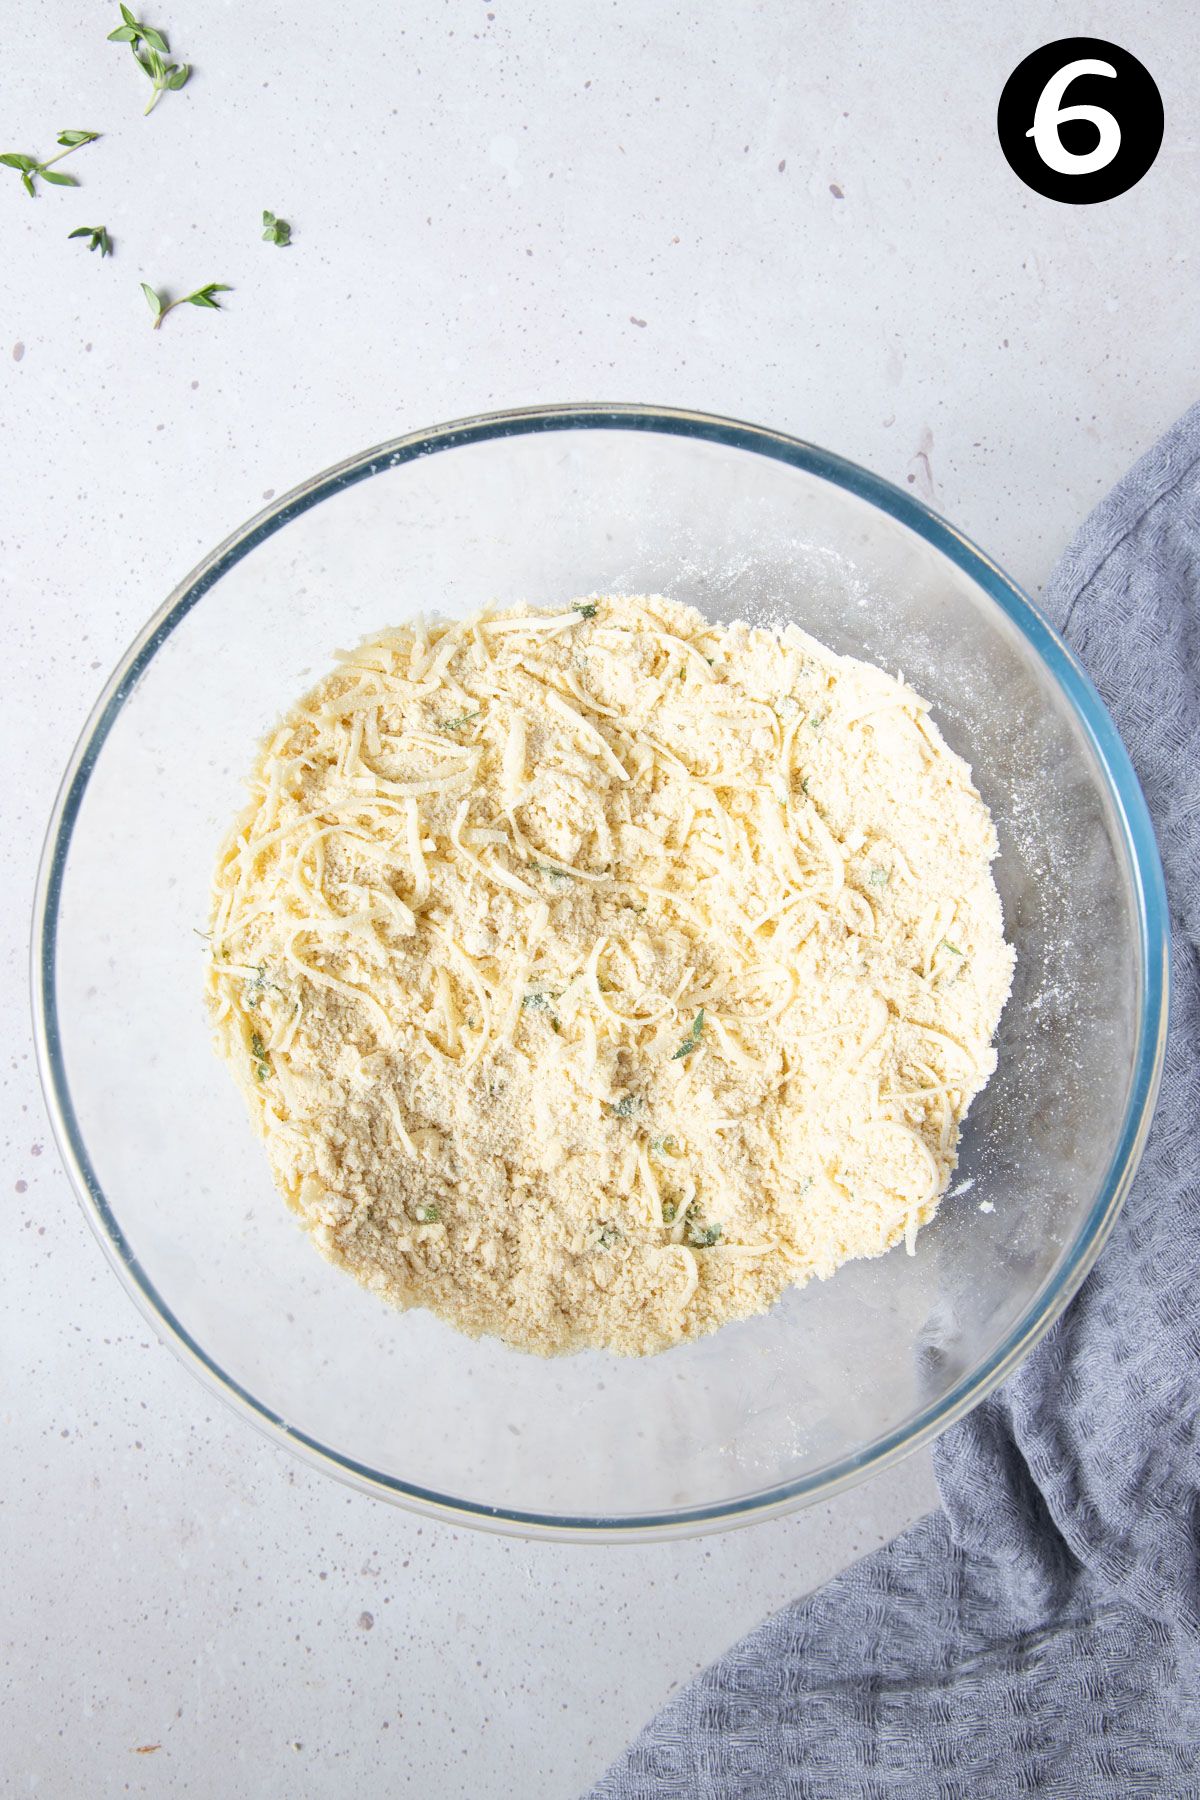 grated cheese mixed with flour mixture in a bowl.